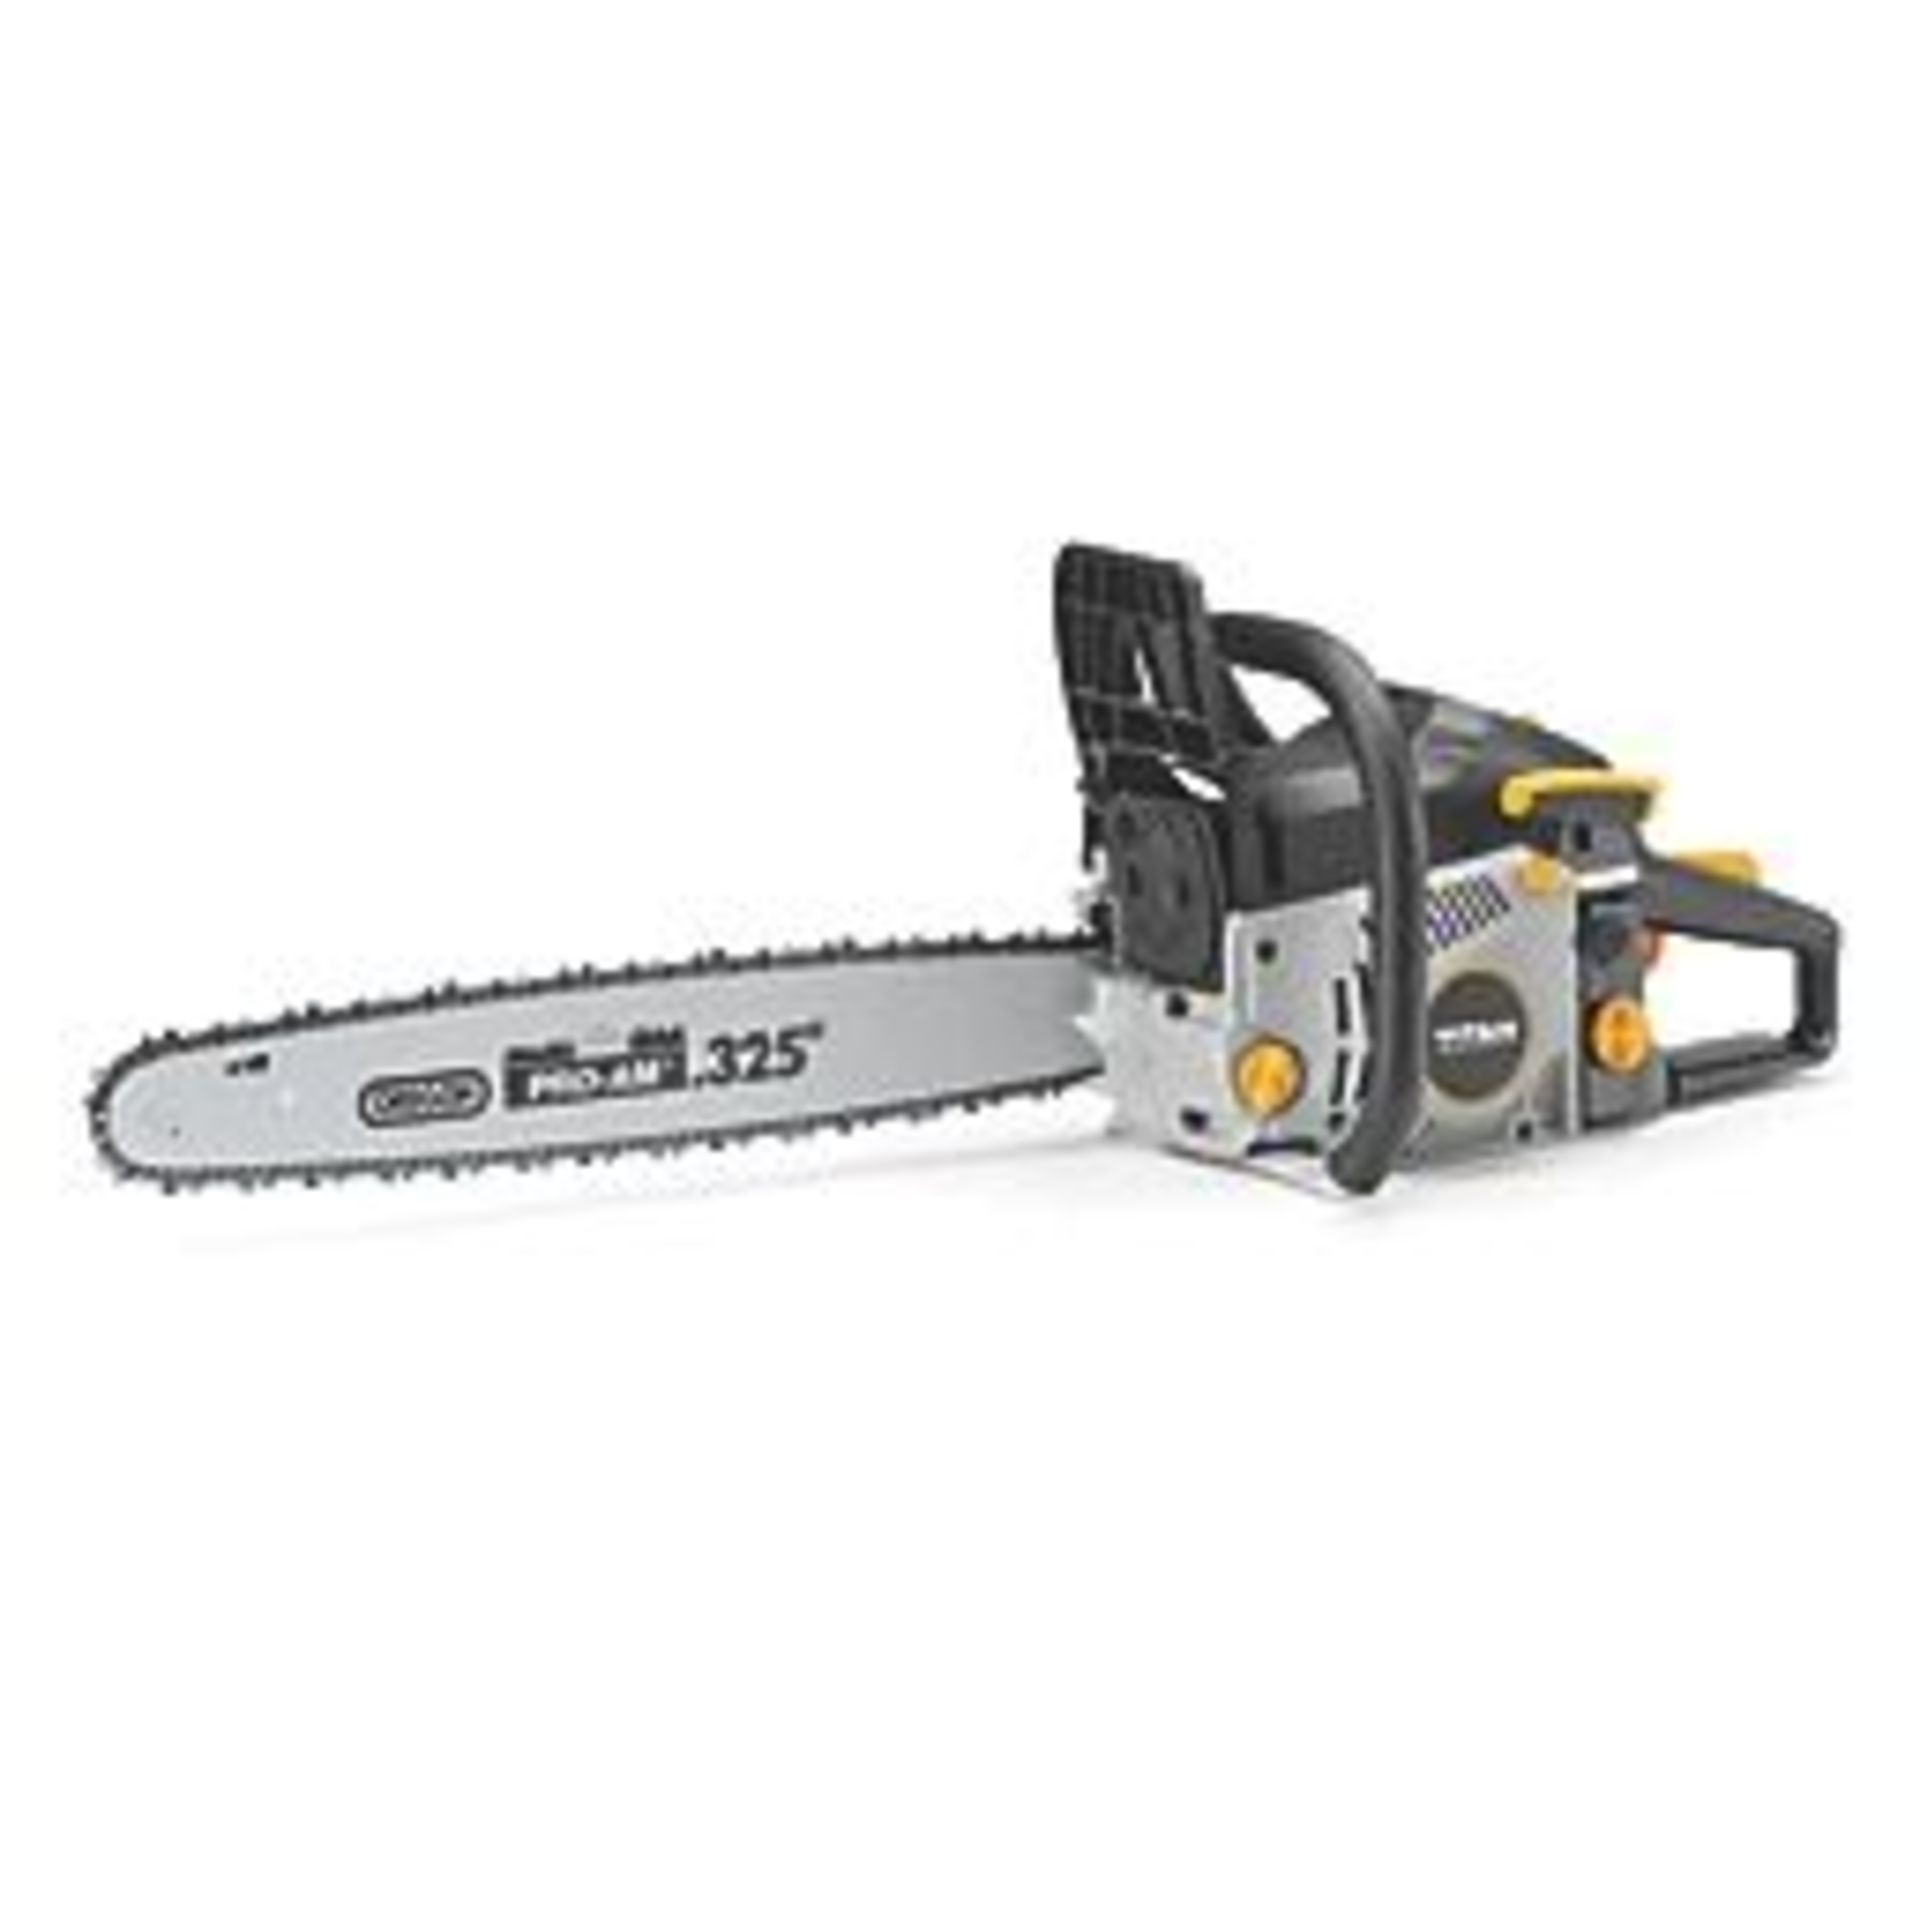 TITAN TTCSP40 40CM 40.1CC CHAINSAW. - P2. Lightweight and agile chainsaw designed for harvesting